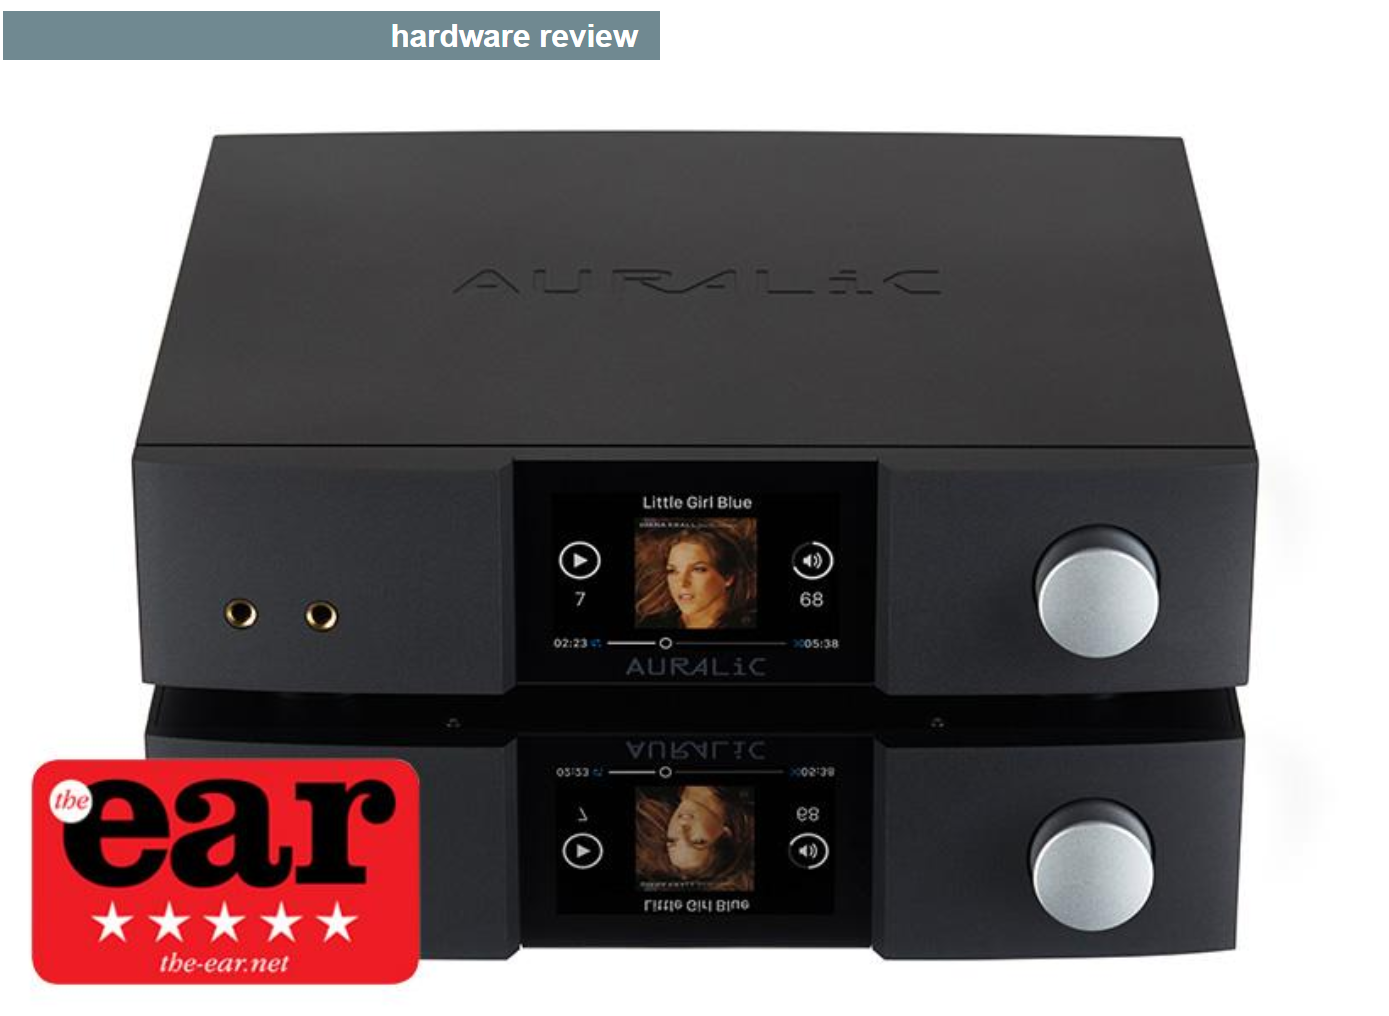 VEGA G1 Five-Star Review by The EAR